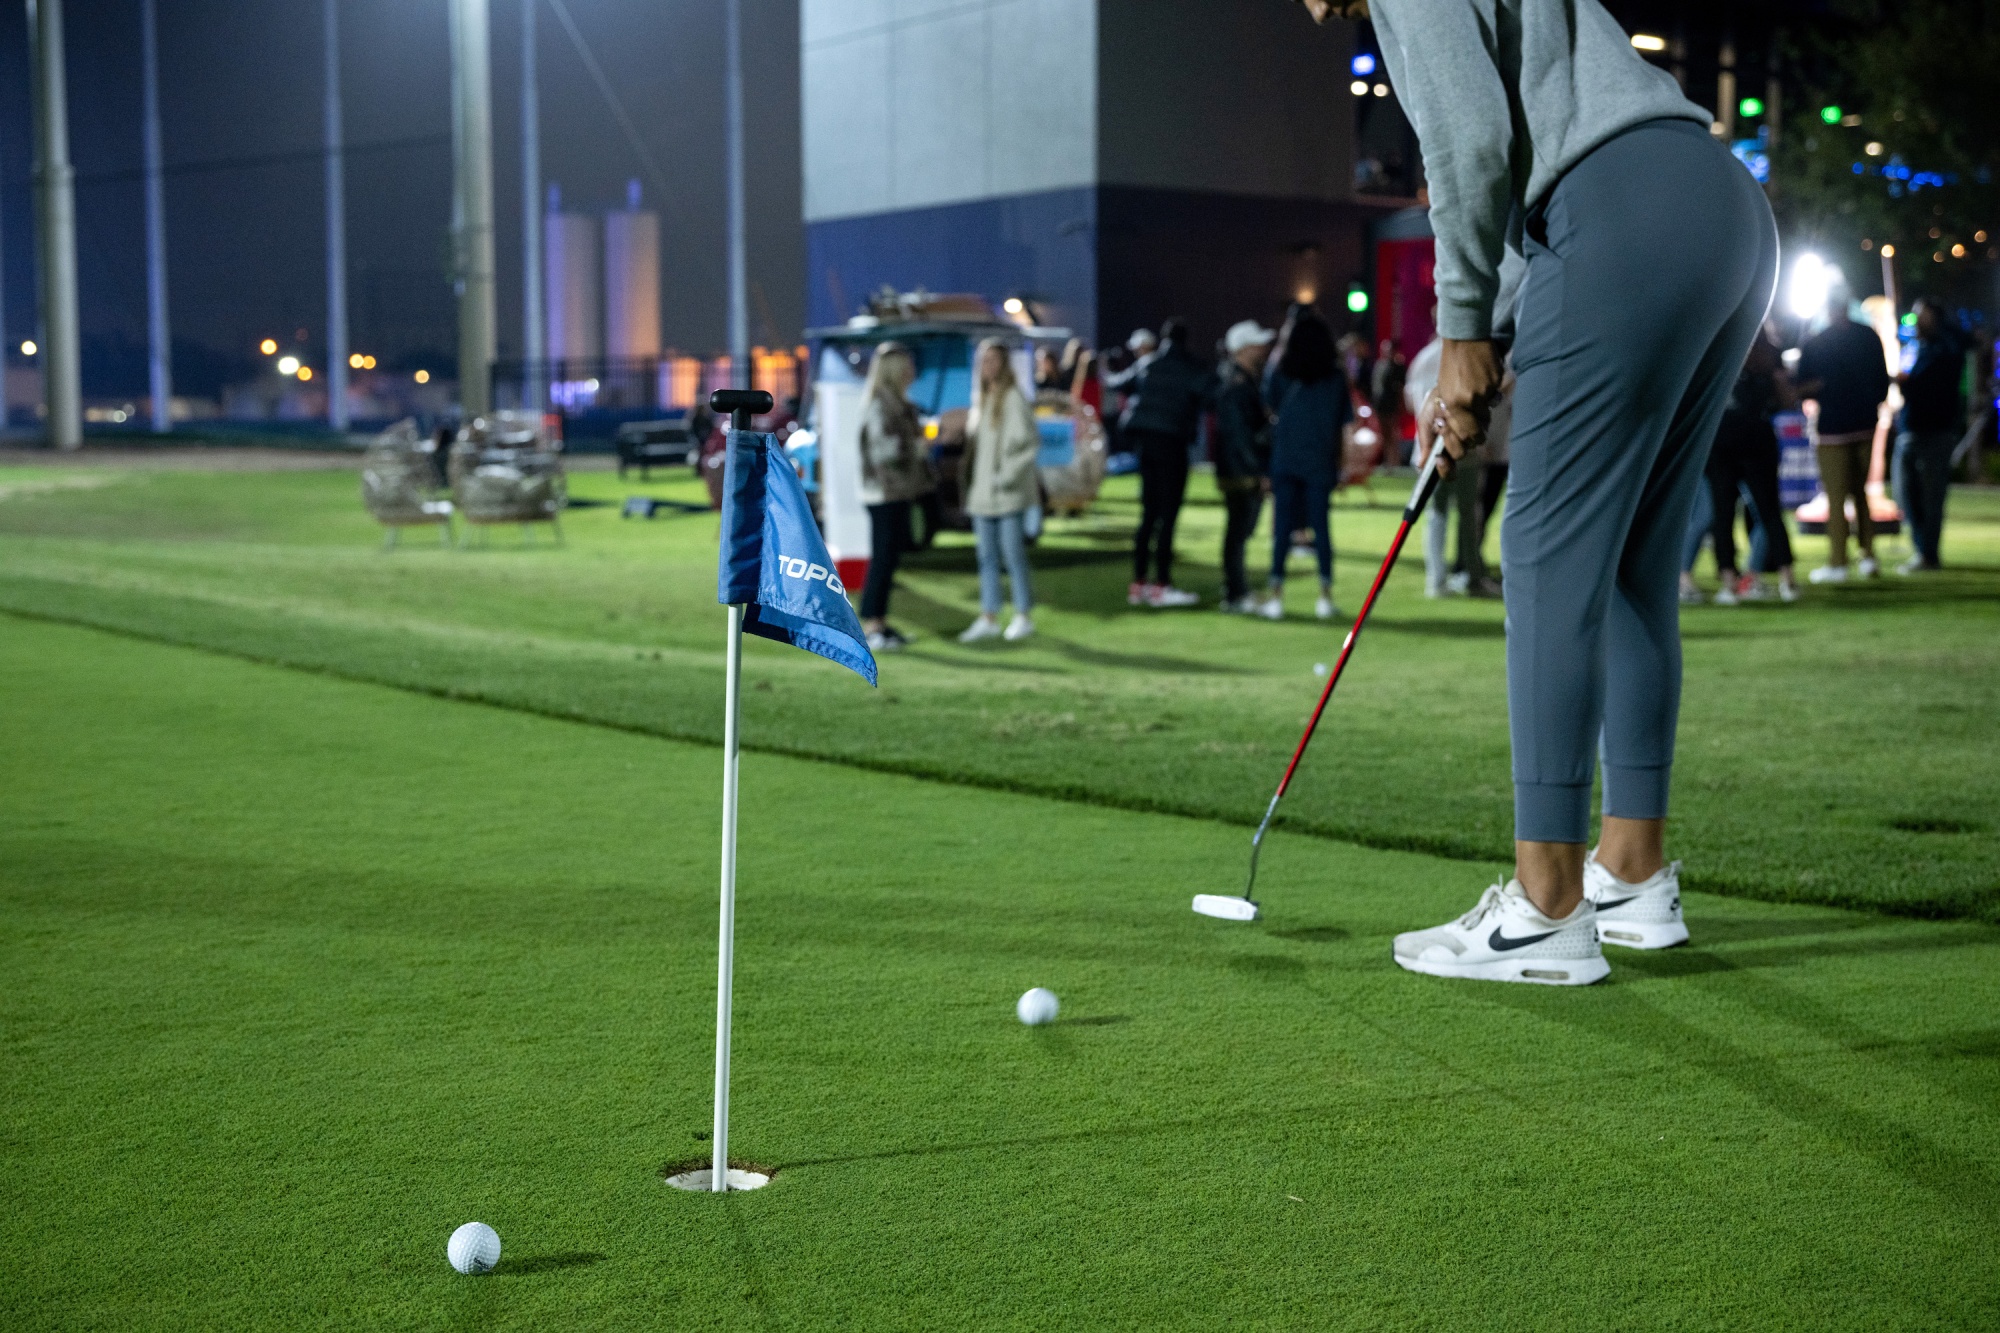 Topgolf Callaway (MODG) Stock Falls 2020 on Concern Golf Boom Is Cooling -  Bloomberg